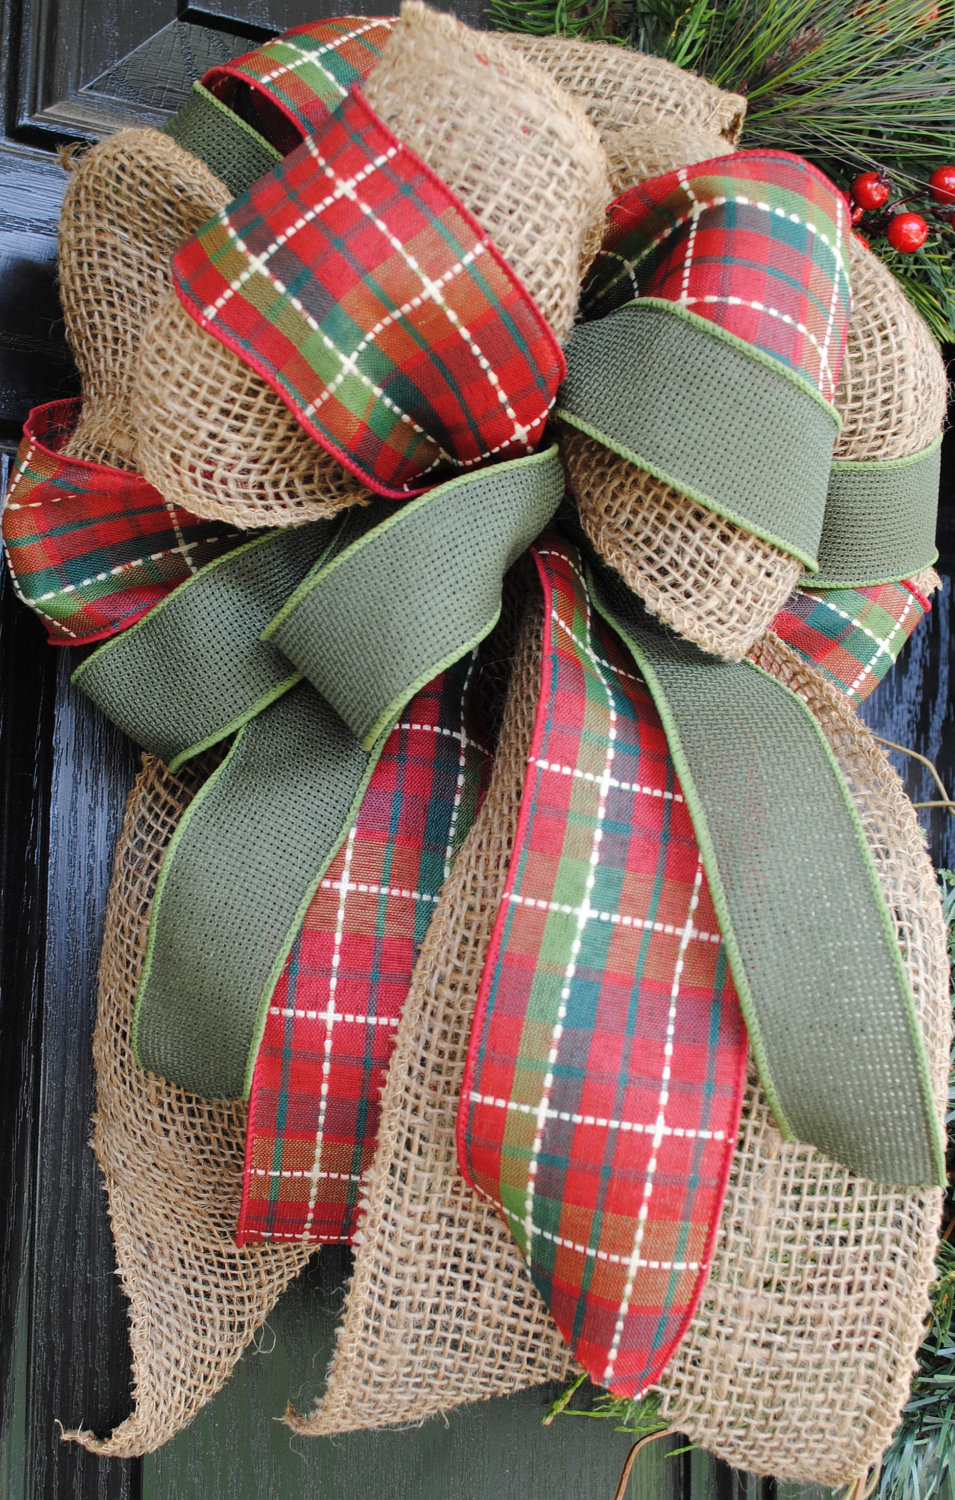 Mixing burlap with evergreen pine, cranberries and plaid ribbon is a great idea for a DIY rustic, natural-looking Christmas wreath.